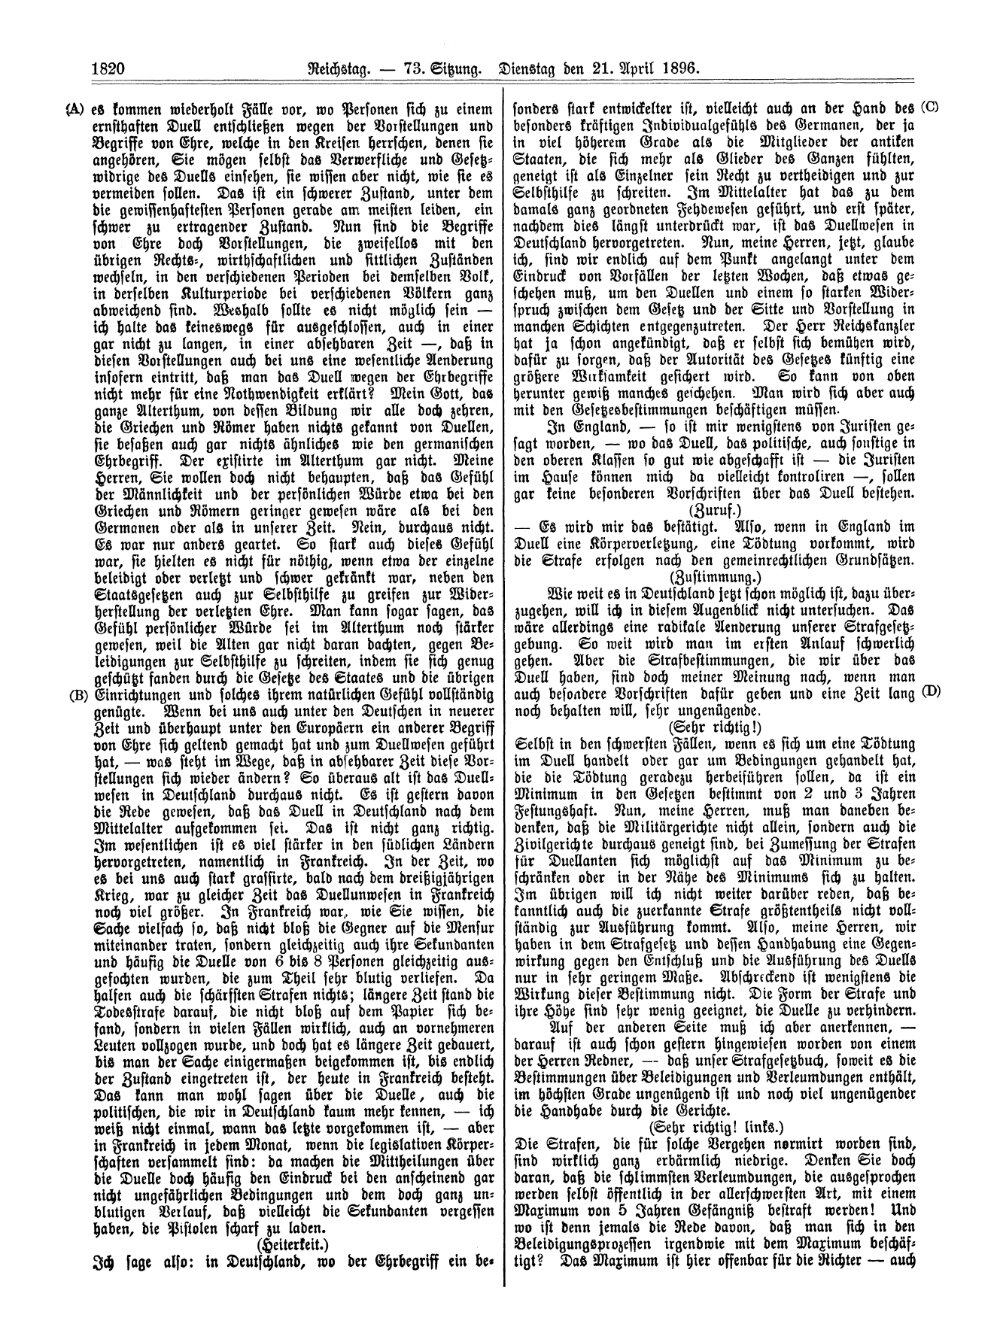 Scan of page 1820